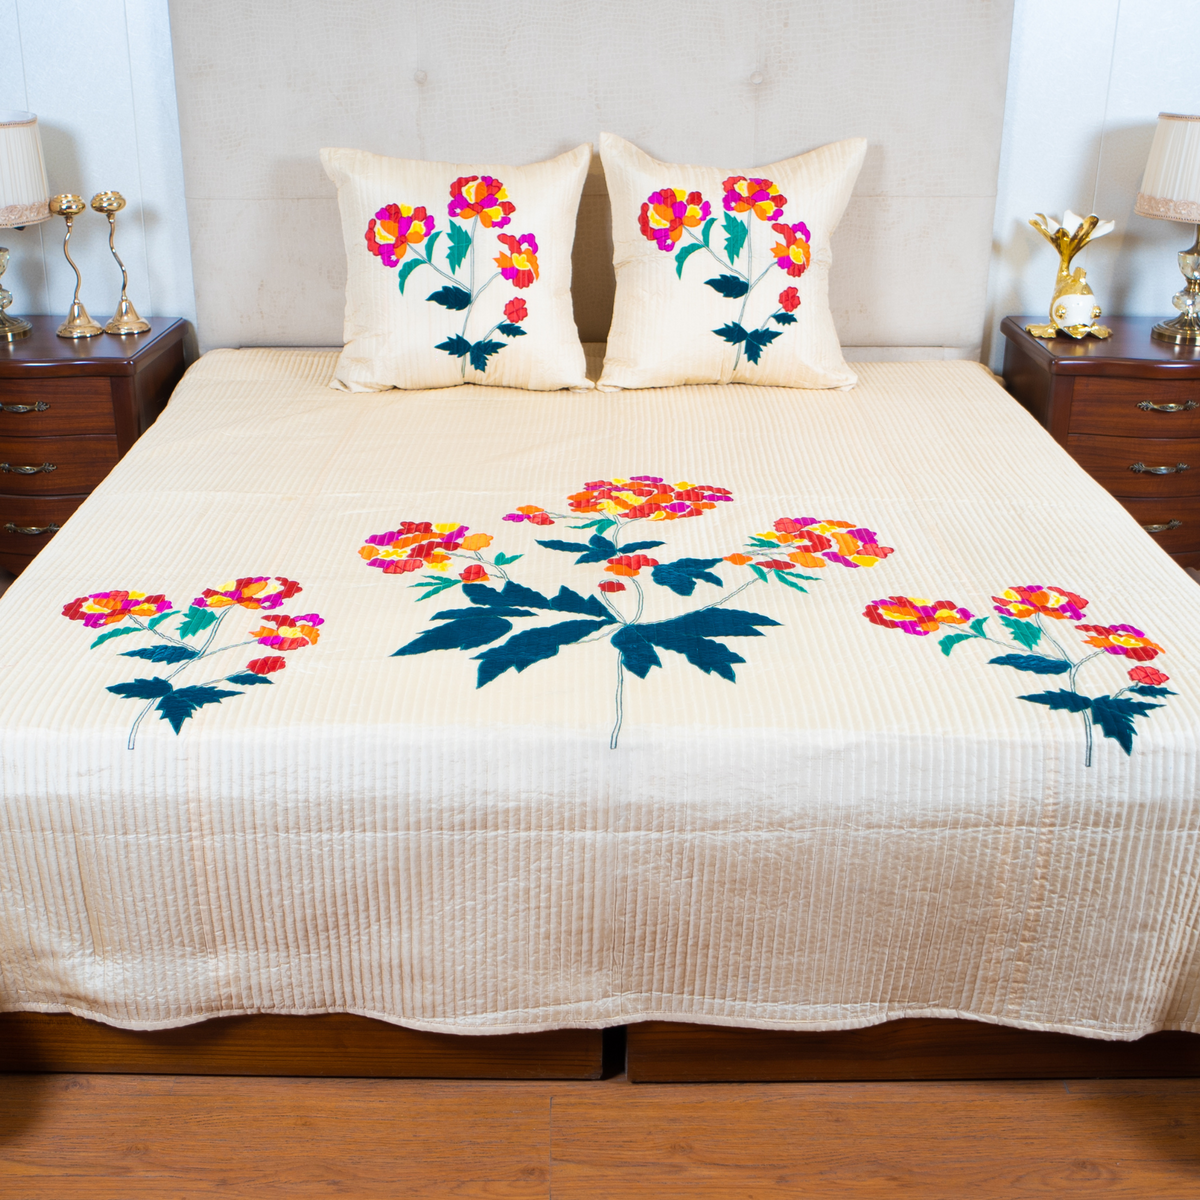 The LuxeLife Beige Embroidered Bedcover